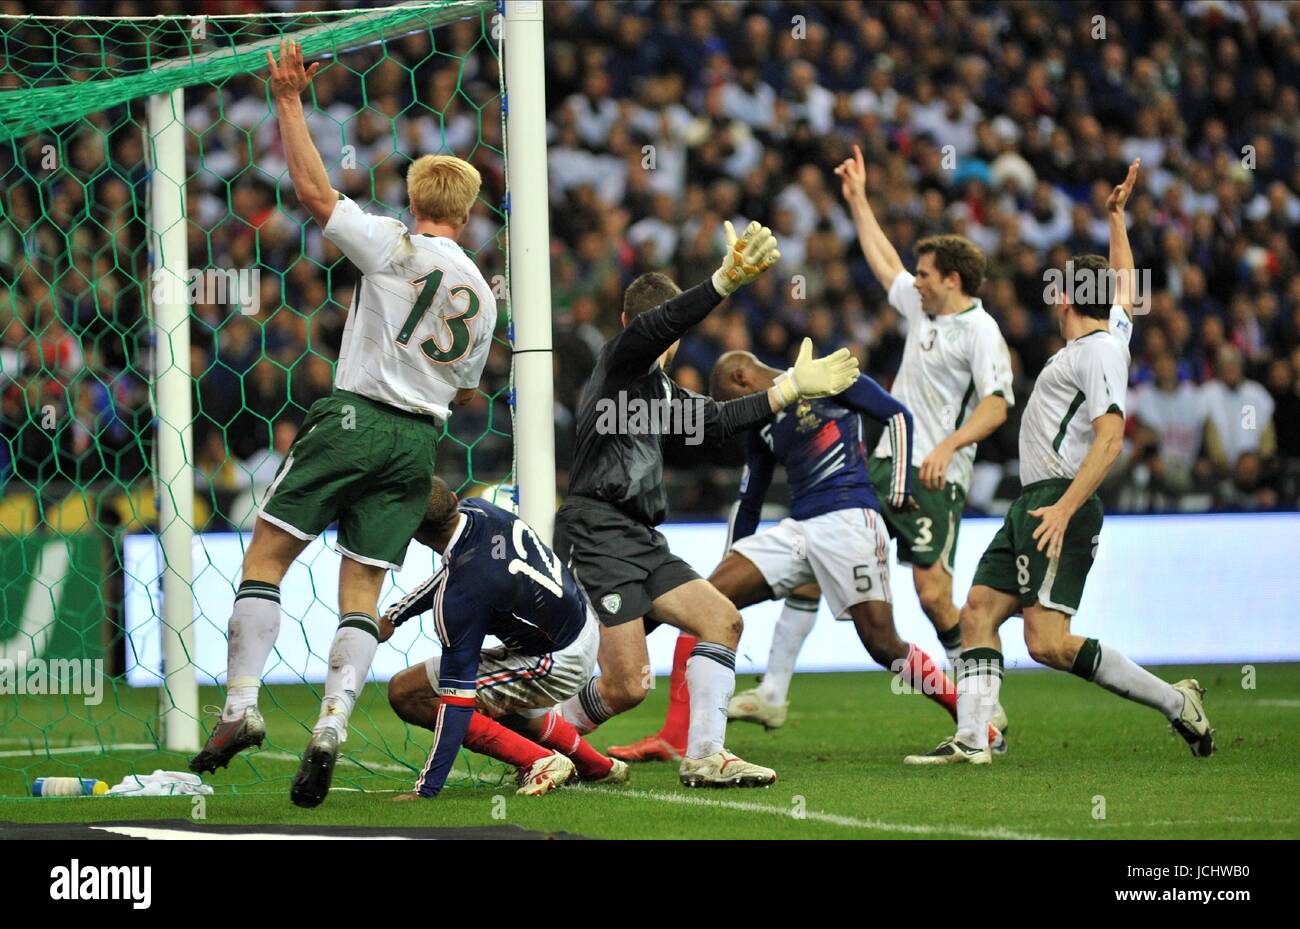 PAUL MCSHANE, WILLIAM GALLAS & THIERRY HENRY  FRANCE V REPUBLIC OF IRELAND (UK USE ONLY) FRANCE V IRELAND (UK USE ONLY) STADE DE FRANCE, PARIS, FRANCE 18 November 2009 GAB4021   HENRY APPEARED TO HANDLE THE BALL TWICE BEFORE FEEDING DEFENDER WILLIAM GALLAS, WHO BUNDLED HOME FROM CLOSE RANGE ON 103 MINUTES TO GIVE FRANCE A 1-1 DRAW IN THE RETURN LEG OF THEIR PLAYOFF AND A 2-1 AGGREGATE WIN.     WARNING! This Photograph May Only Be Used For Newspaper And/Or Magazine Editorial Purposes. May Not Be Used For Publications Involving 1 player, 1 Club Or 1 Competition  Without Written Authorisation Fro Stock Photo